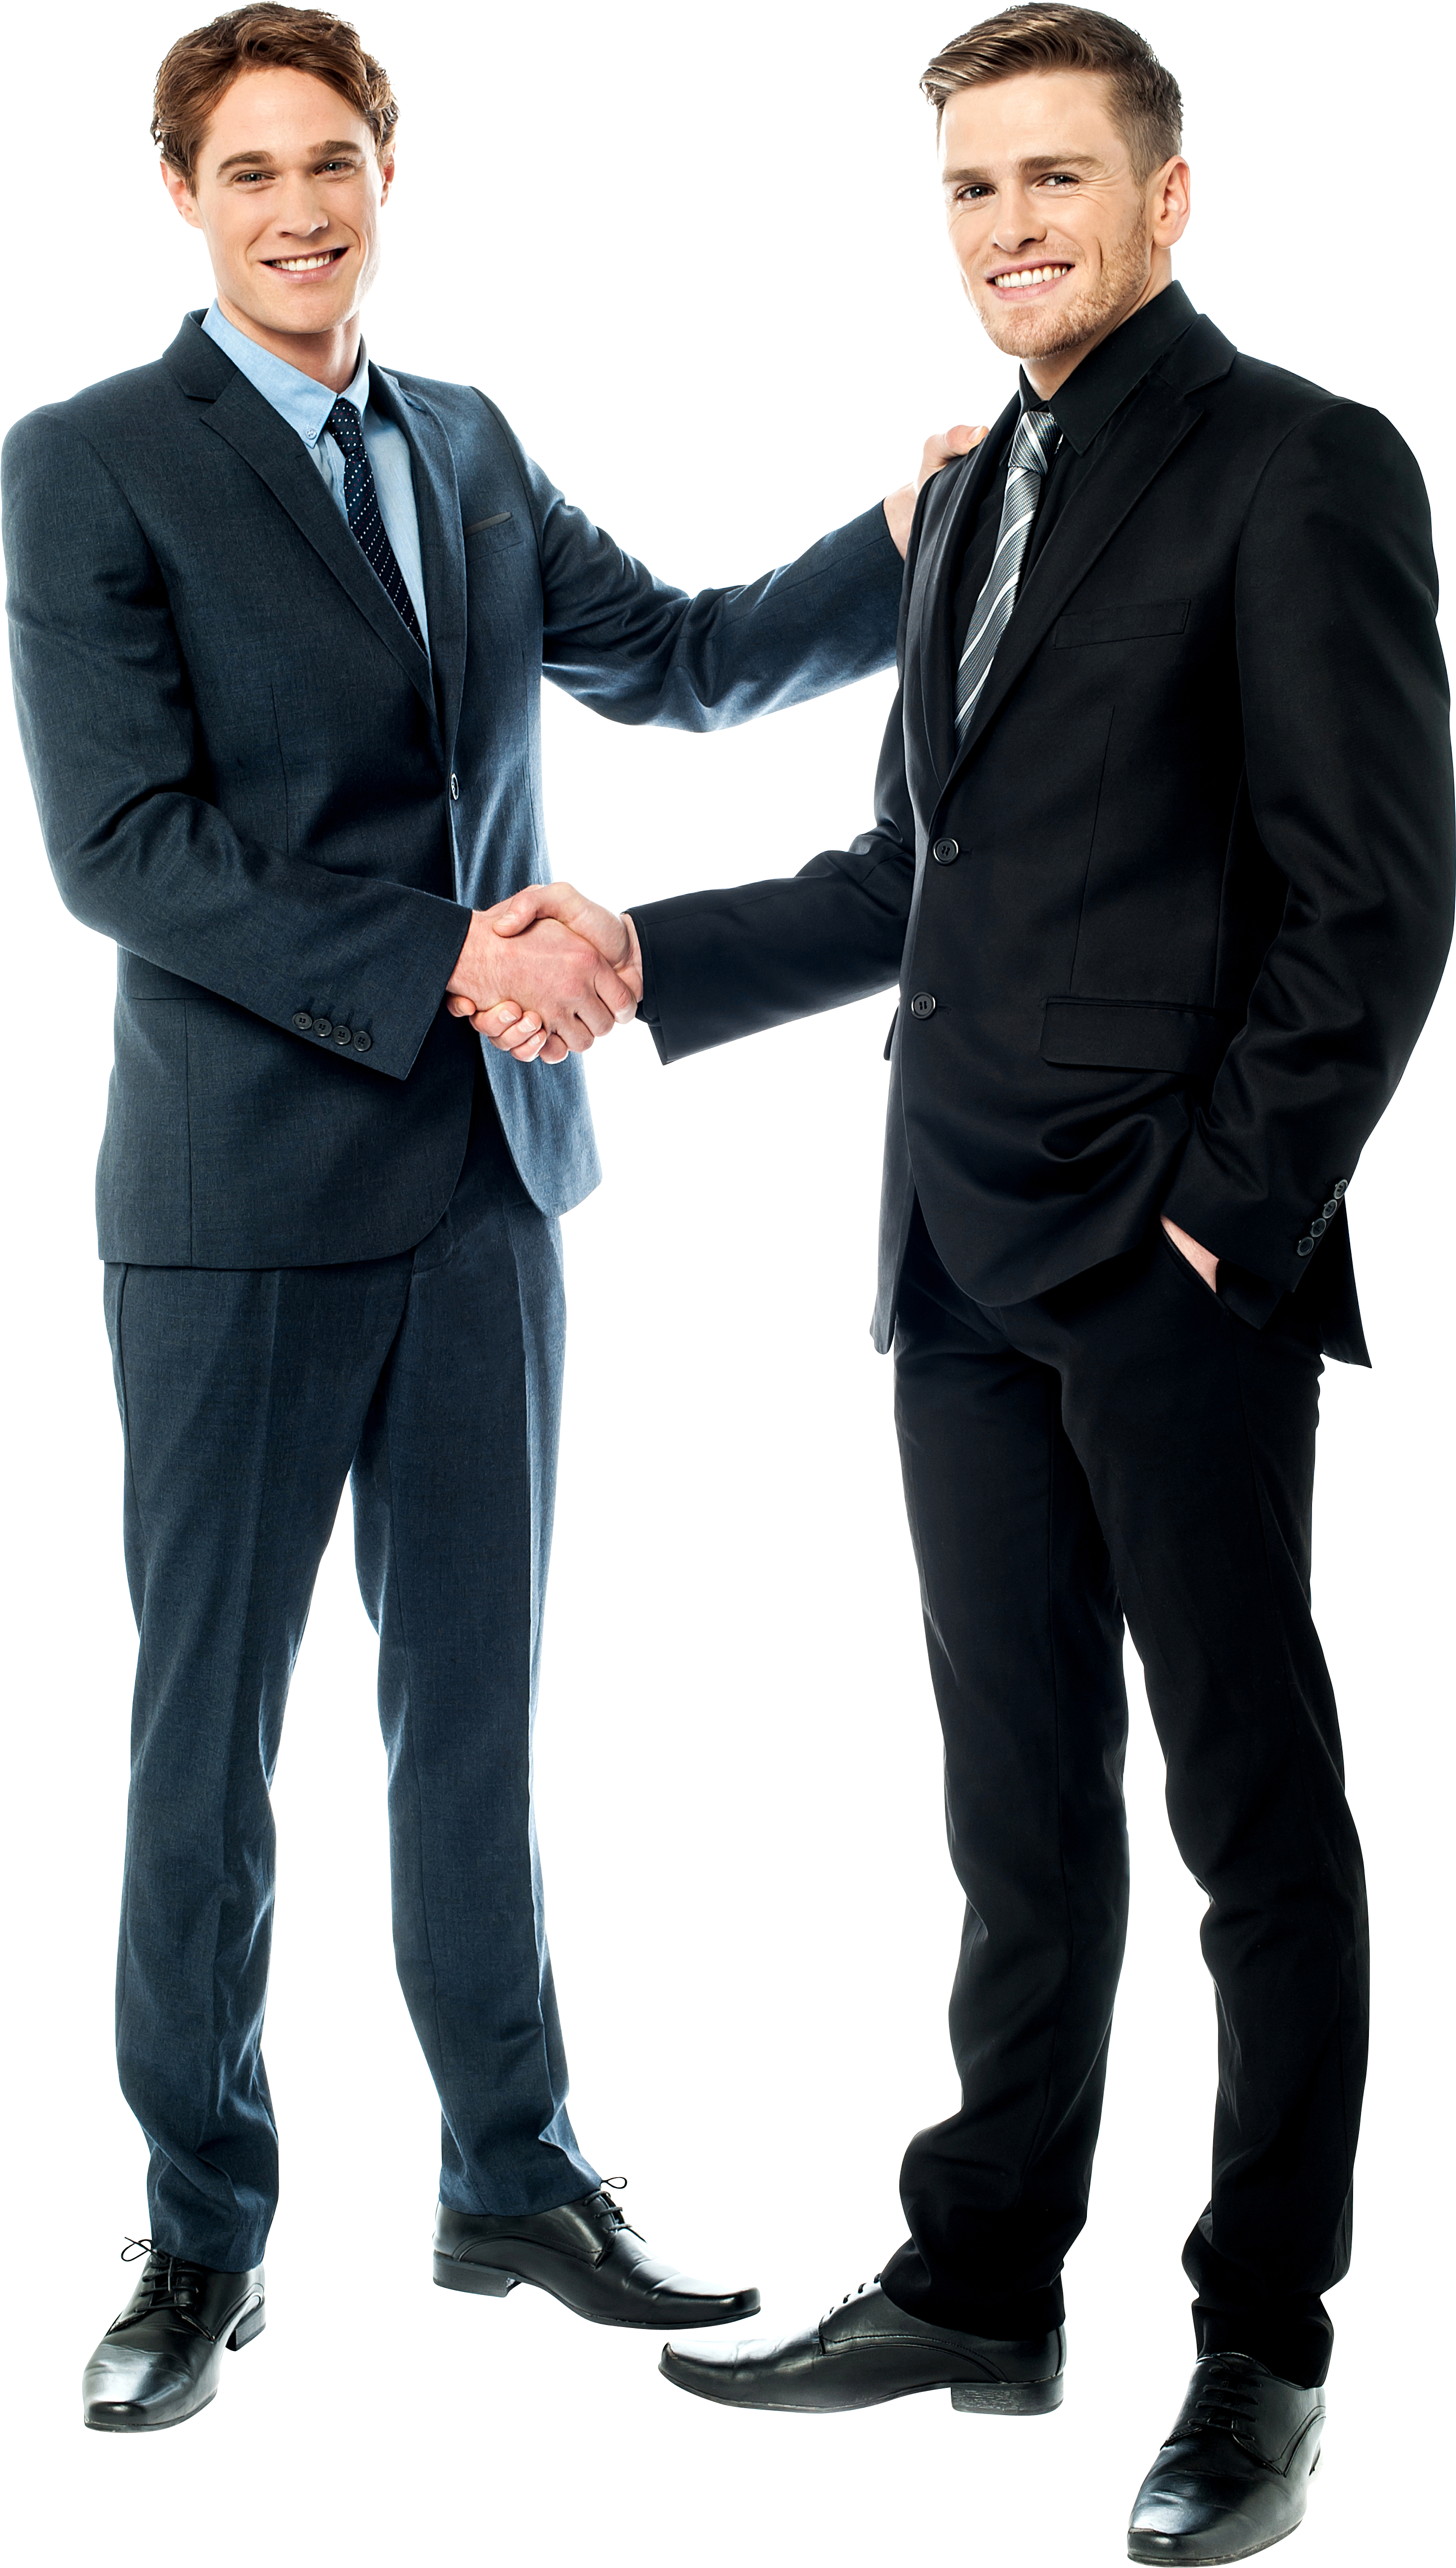 Two Men In Suits Shaking Hands